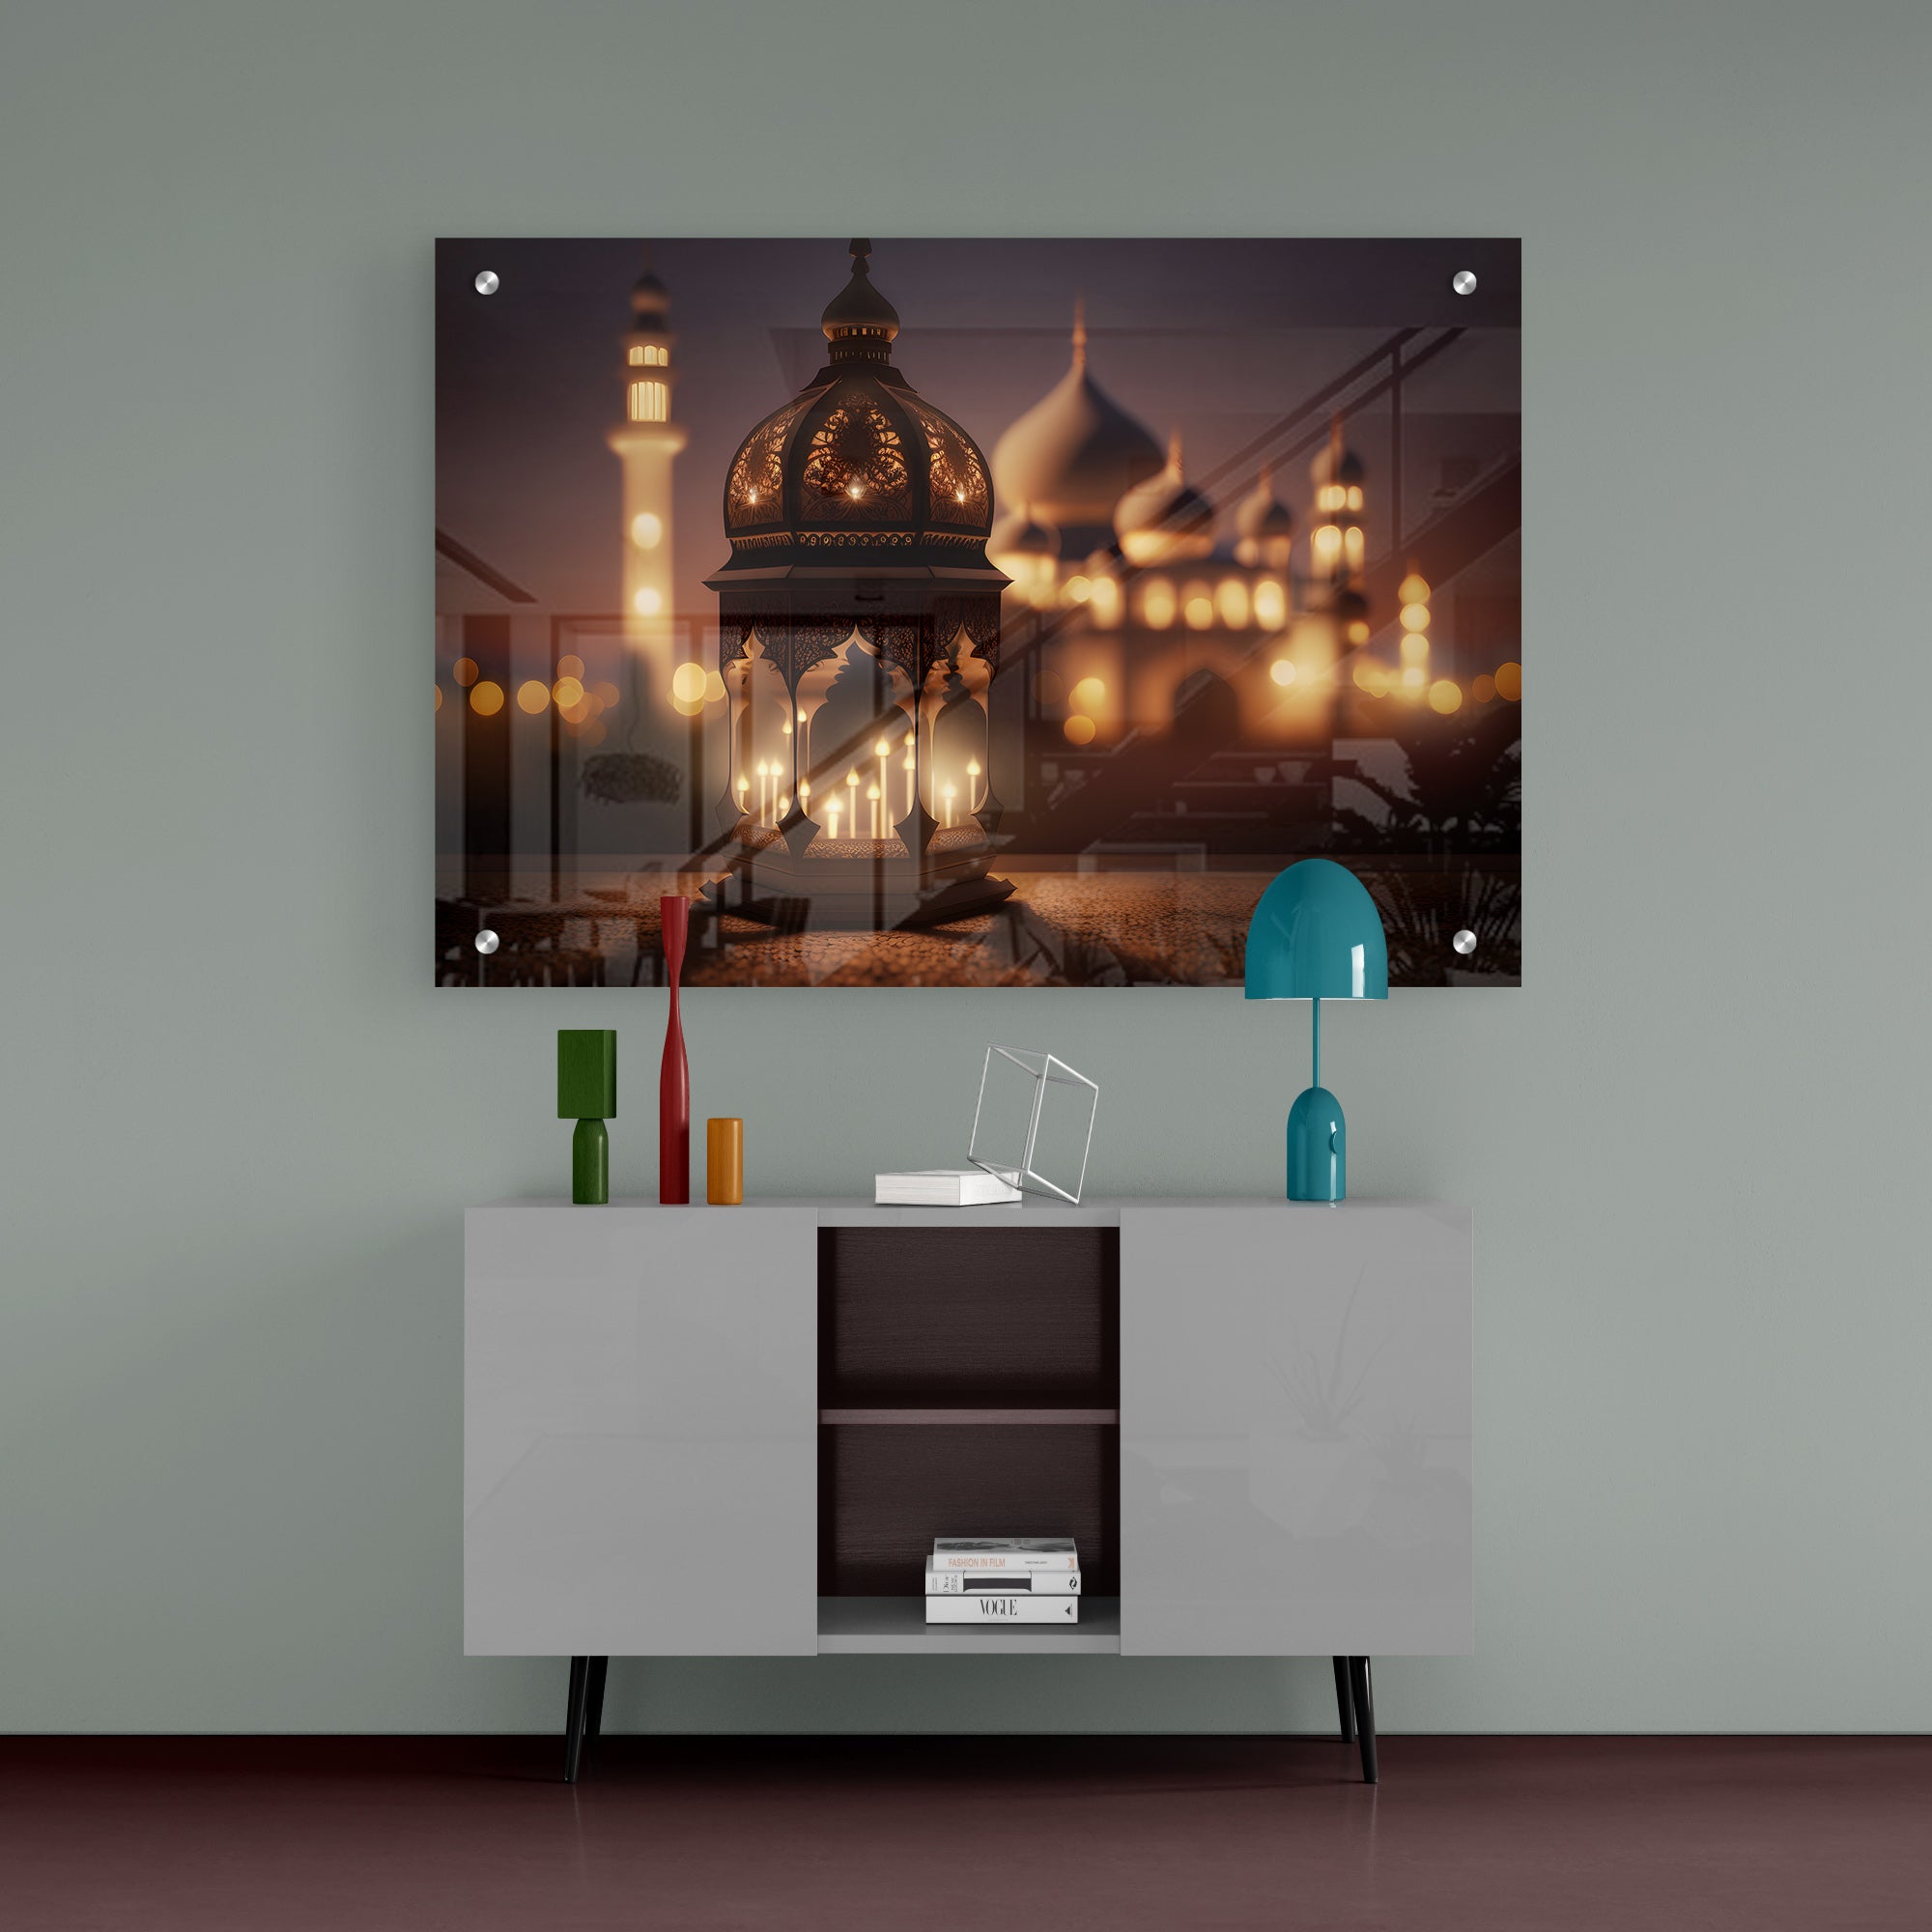 Ramadan Fasting From Dawn Mosque Acrylic Wall Painting